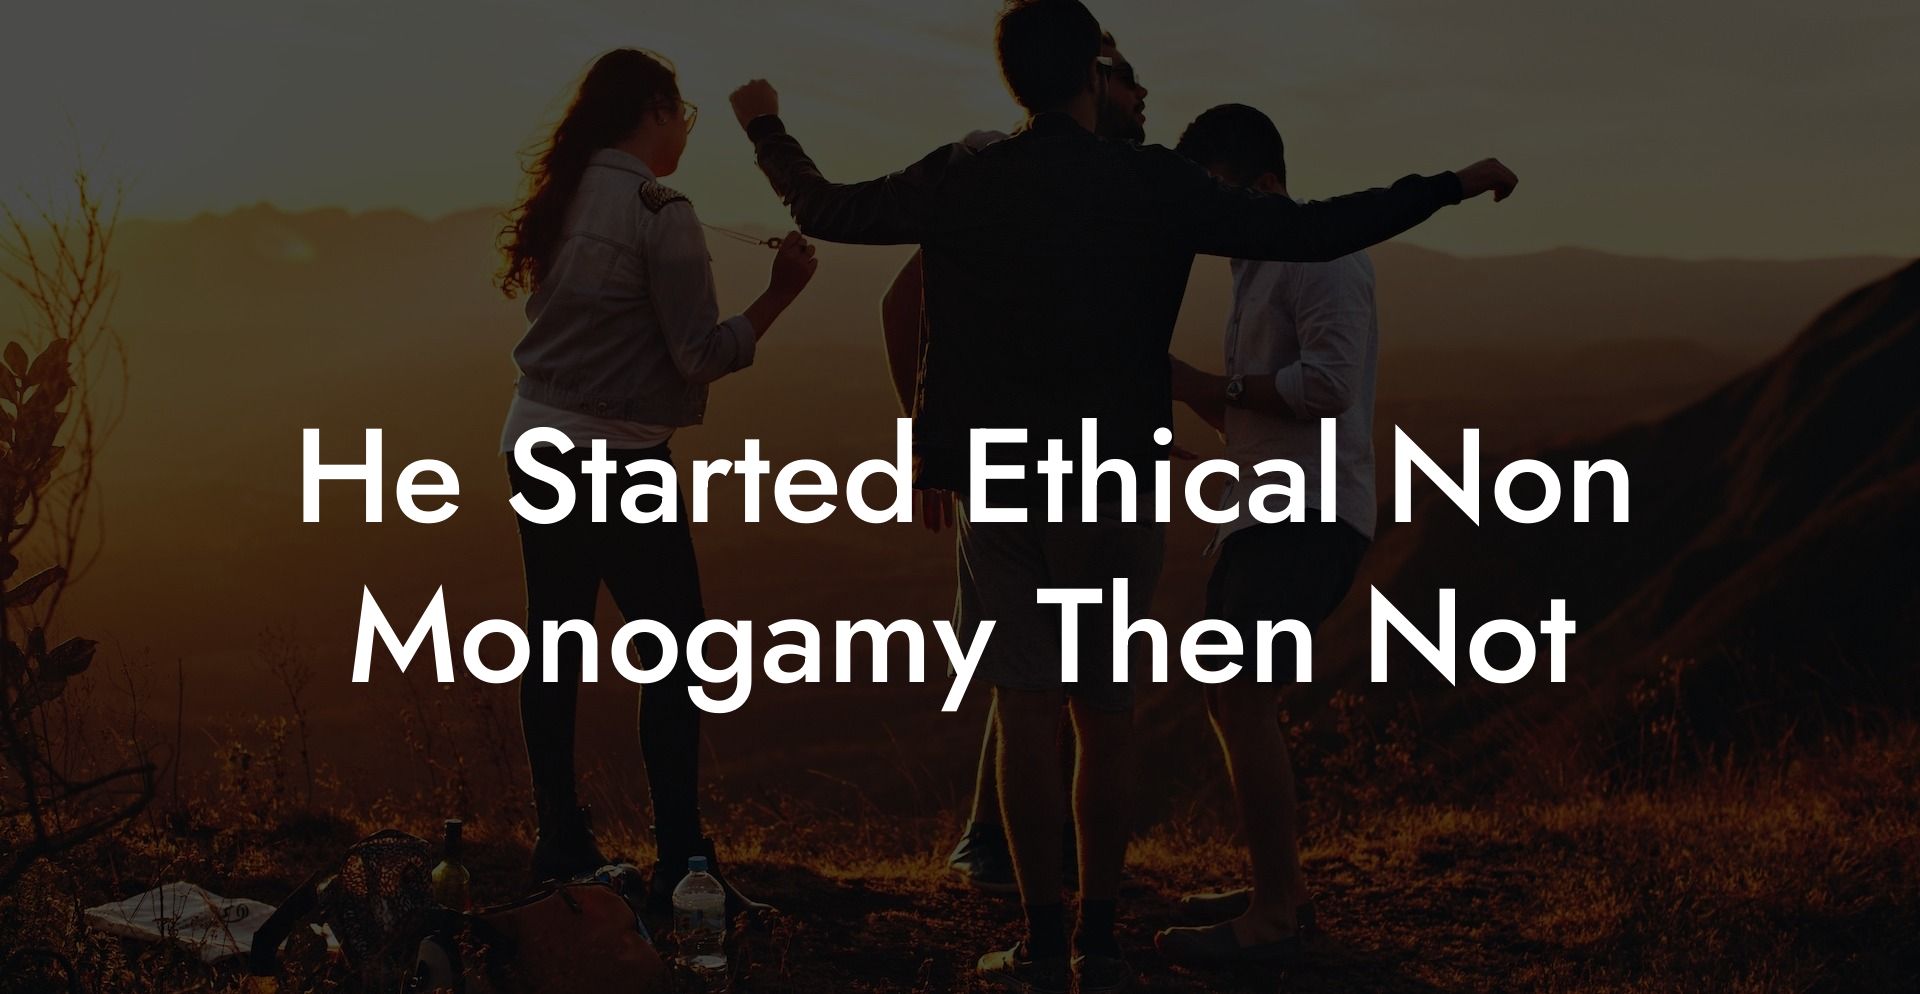 He Started Ethical Non Monogamy Then Not